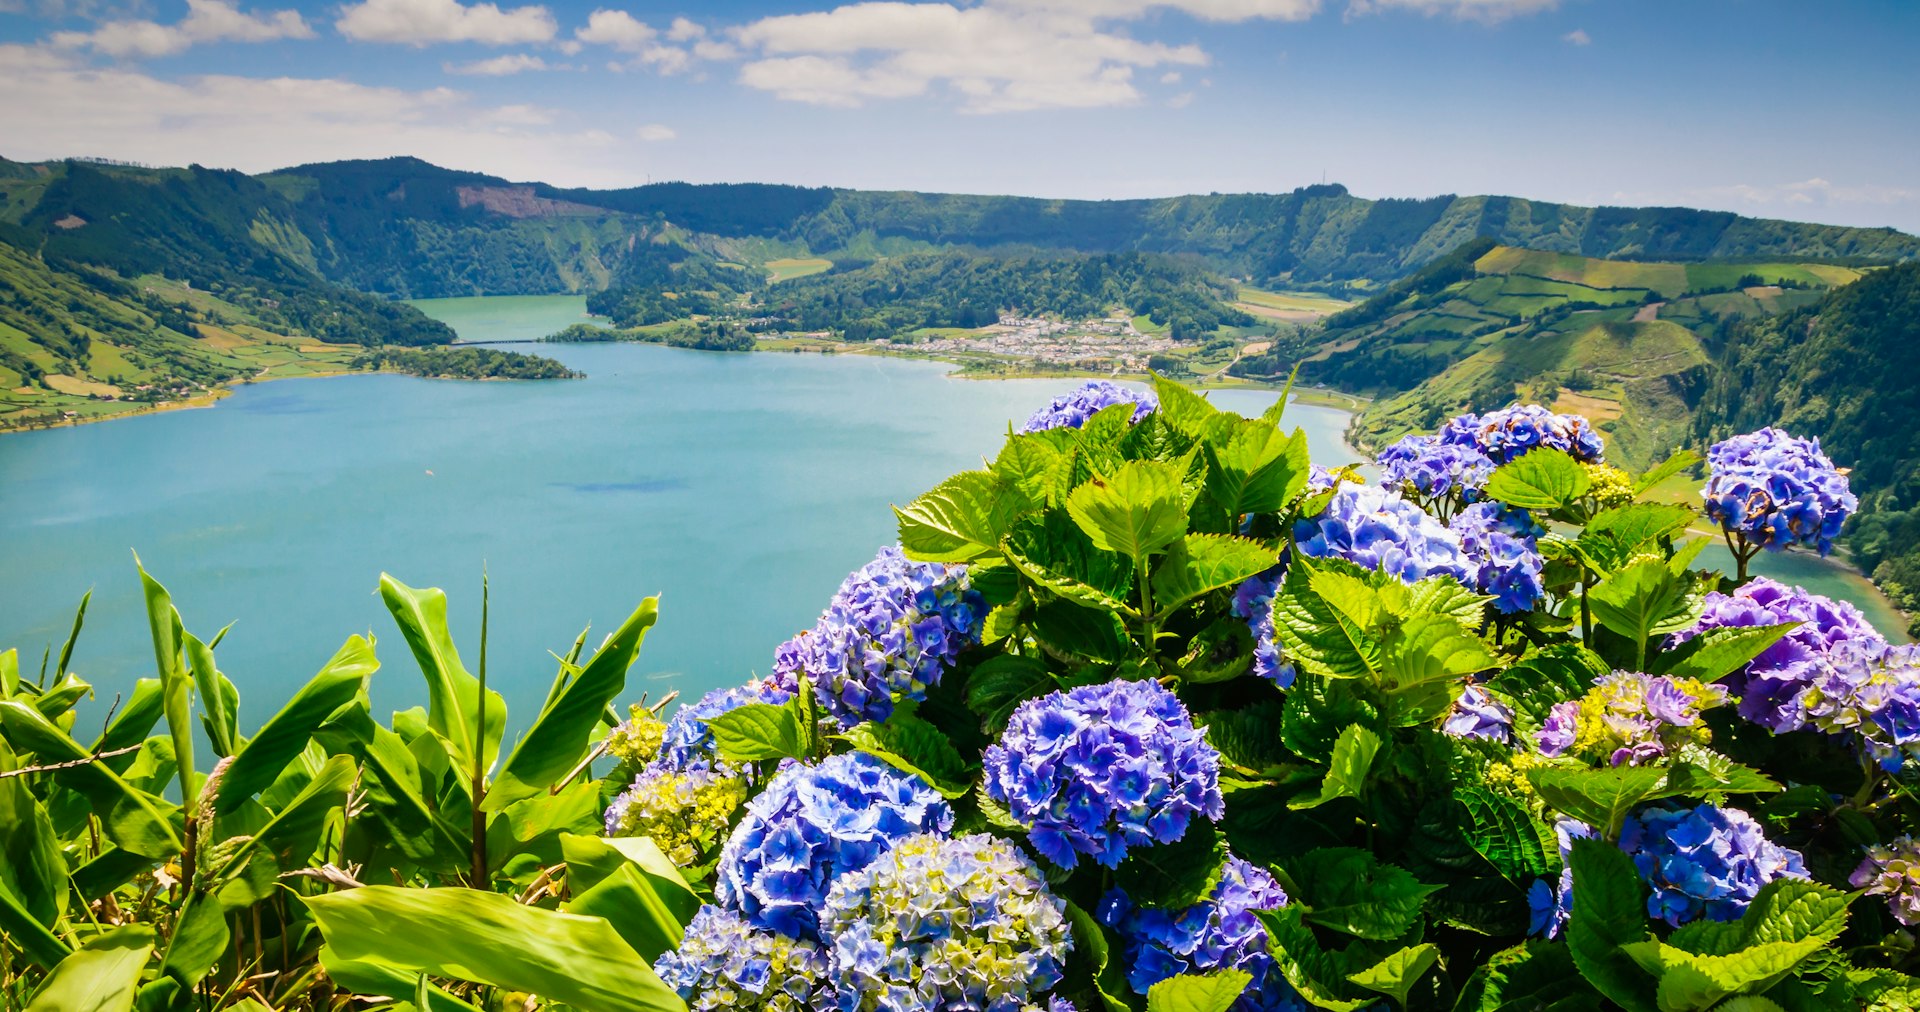 Lake of Sete Cidades with blooming hortensia flowers in the foreground, Azores